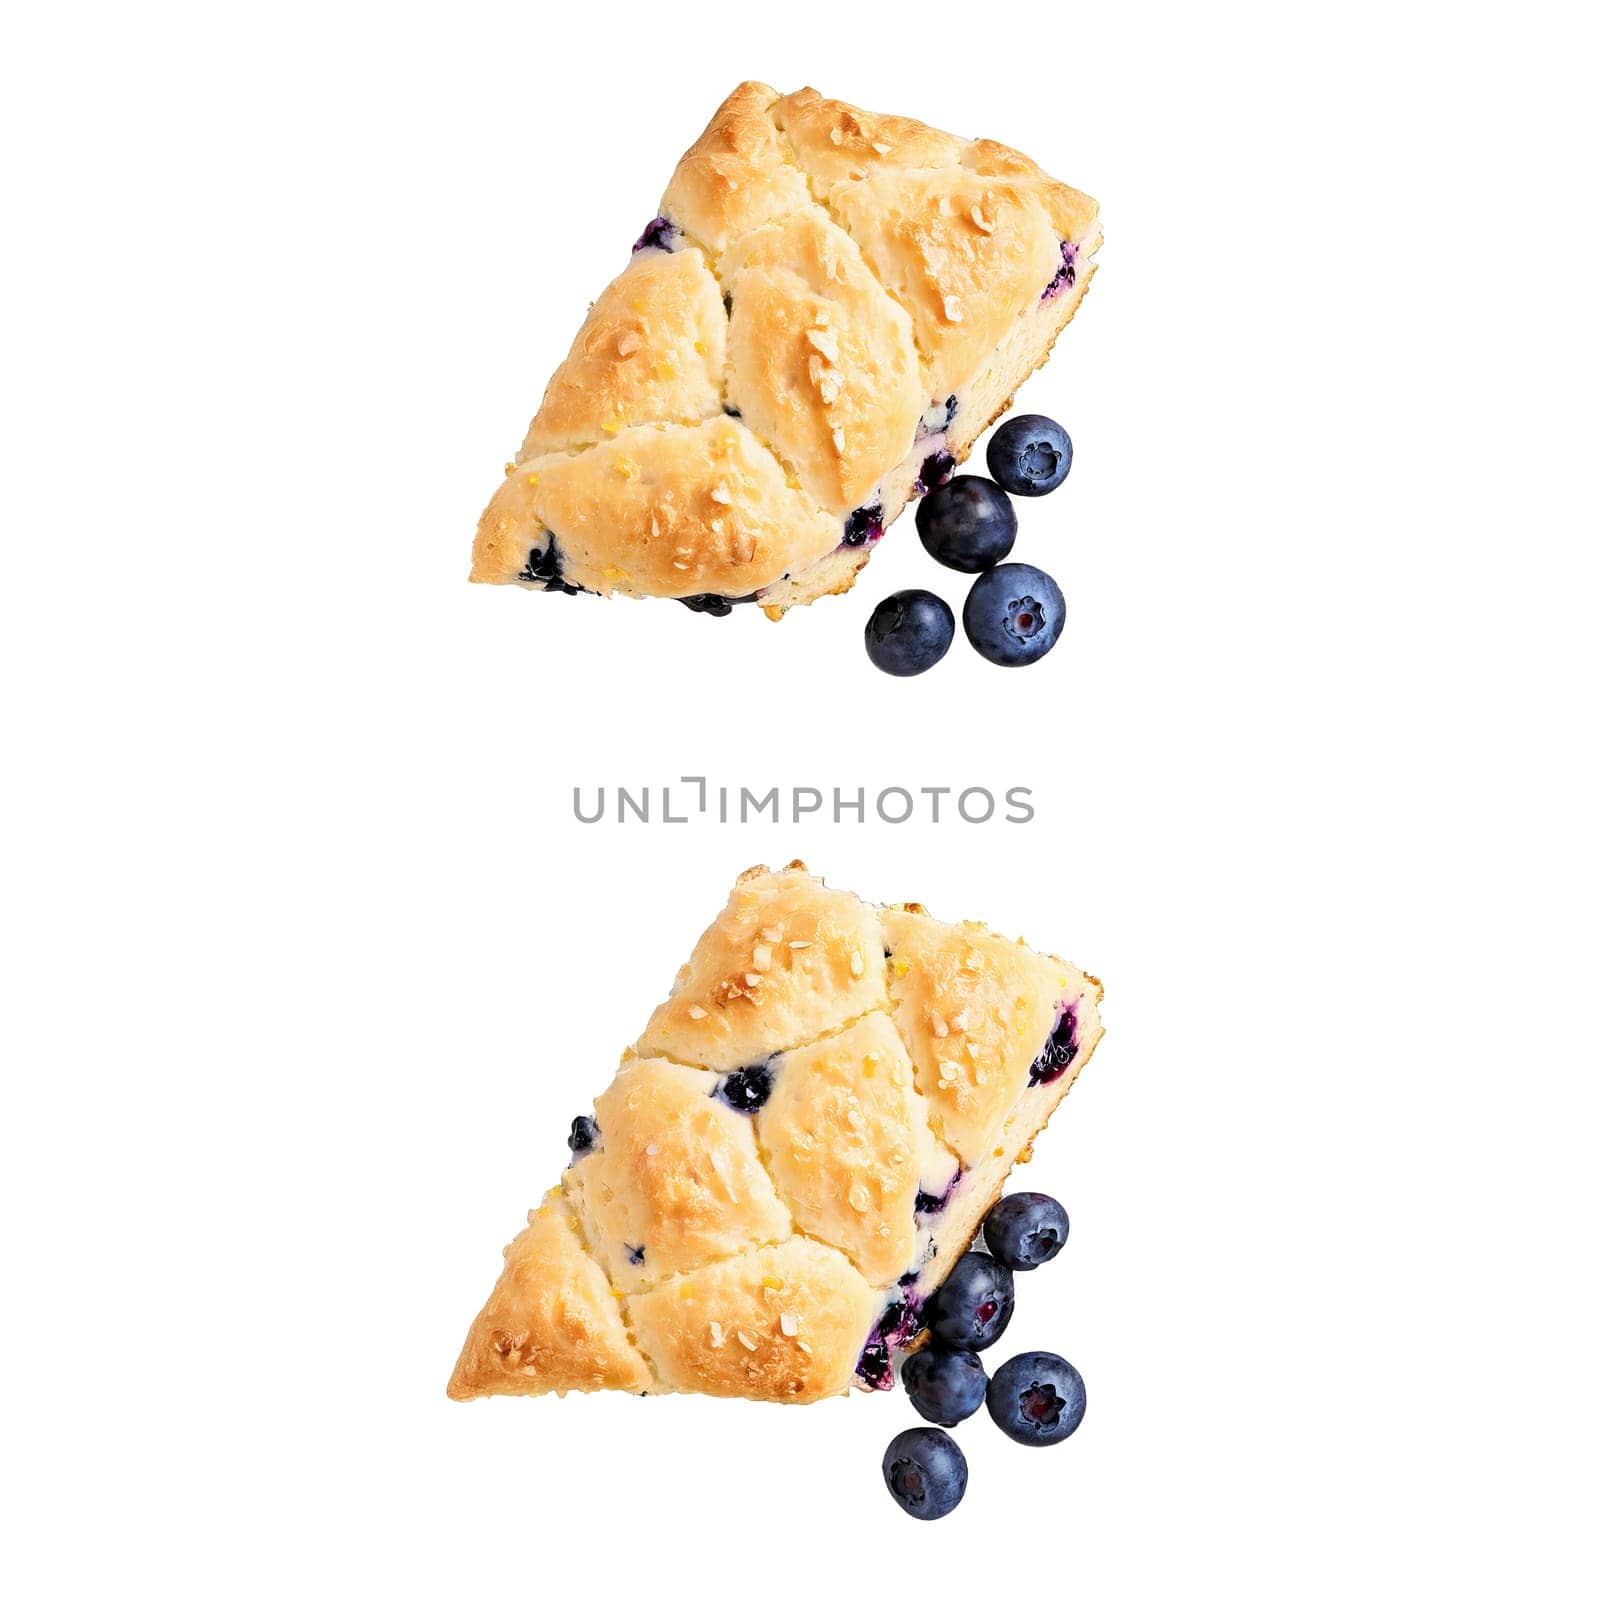 Lemon blueberry scone with golden brown exterior visible blueberry pieces lemon zest drizzled with glaze. close-up cake, isolated on transparent background